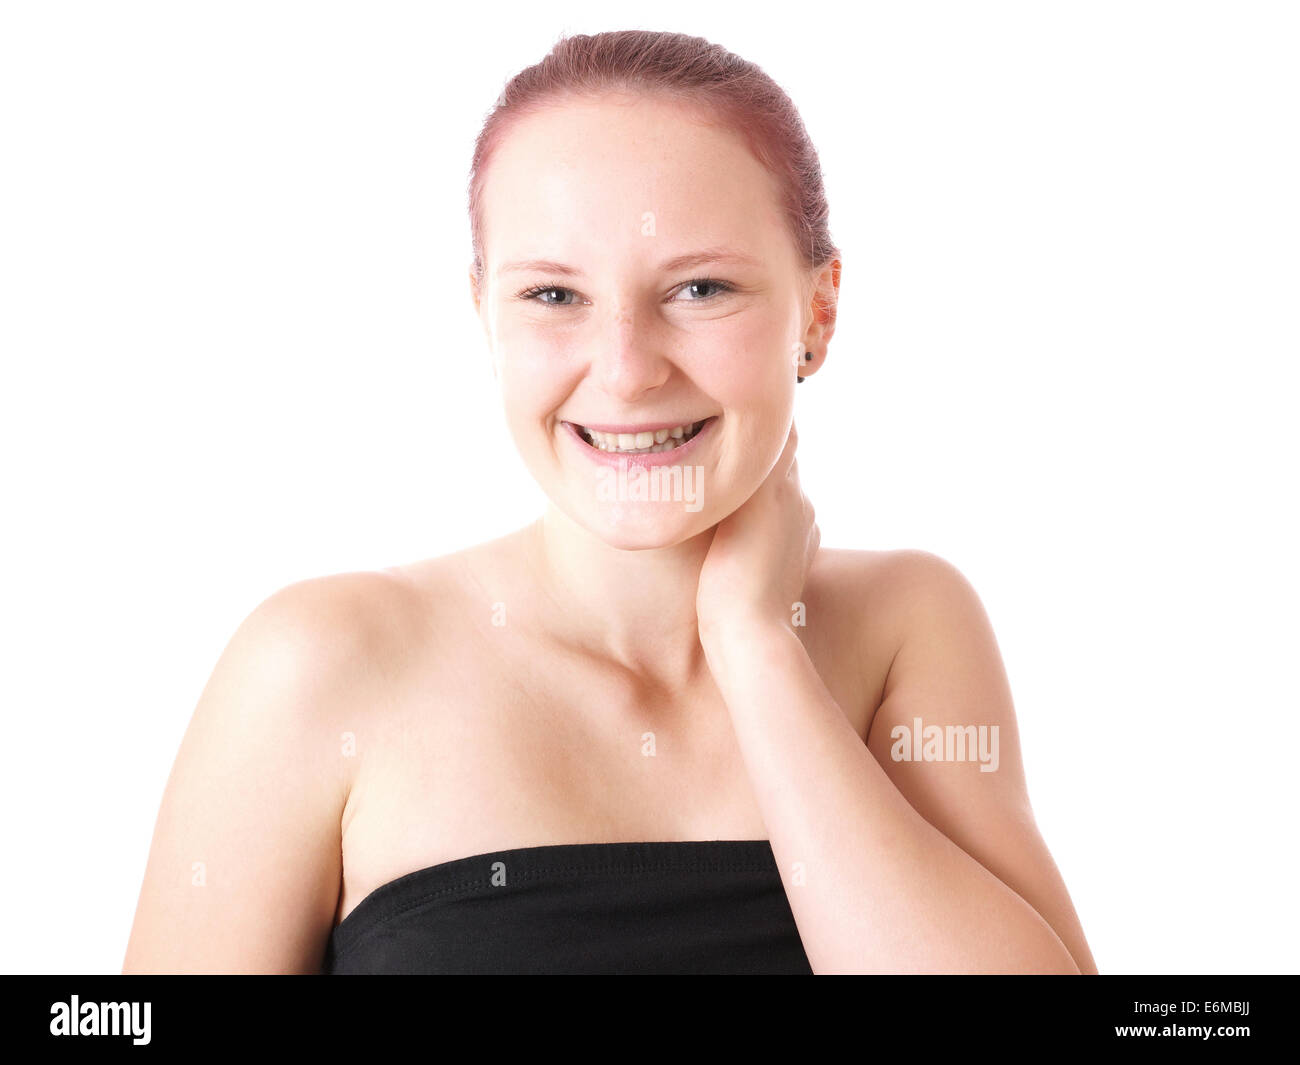 Cute happy young woman laughing Banque D'Images